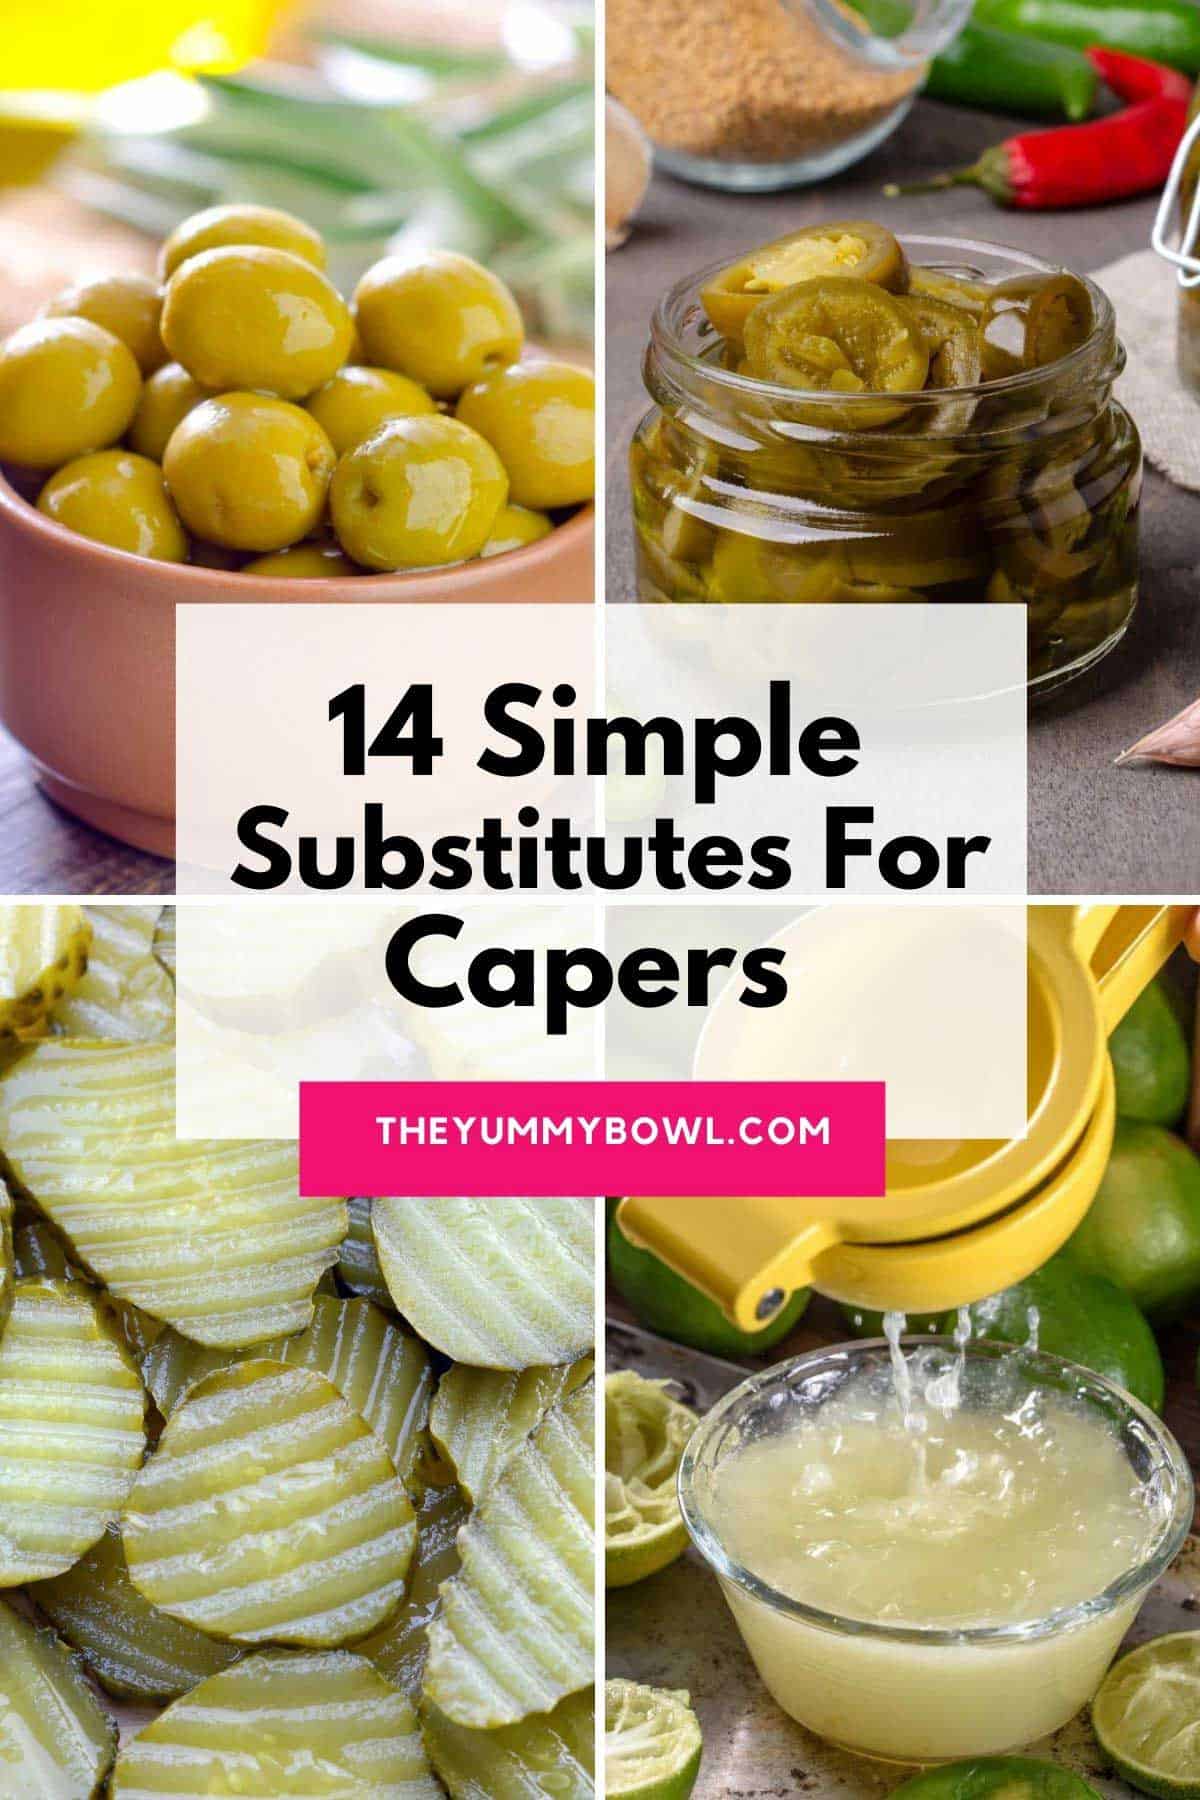 a list of simple substitutes for capers